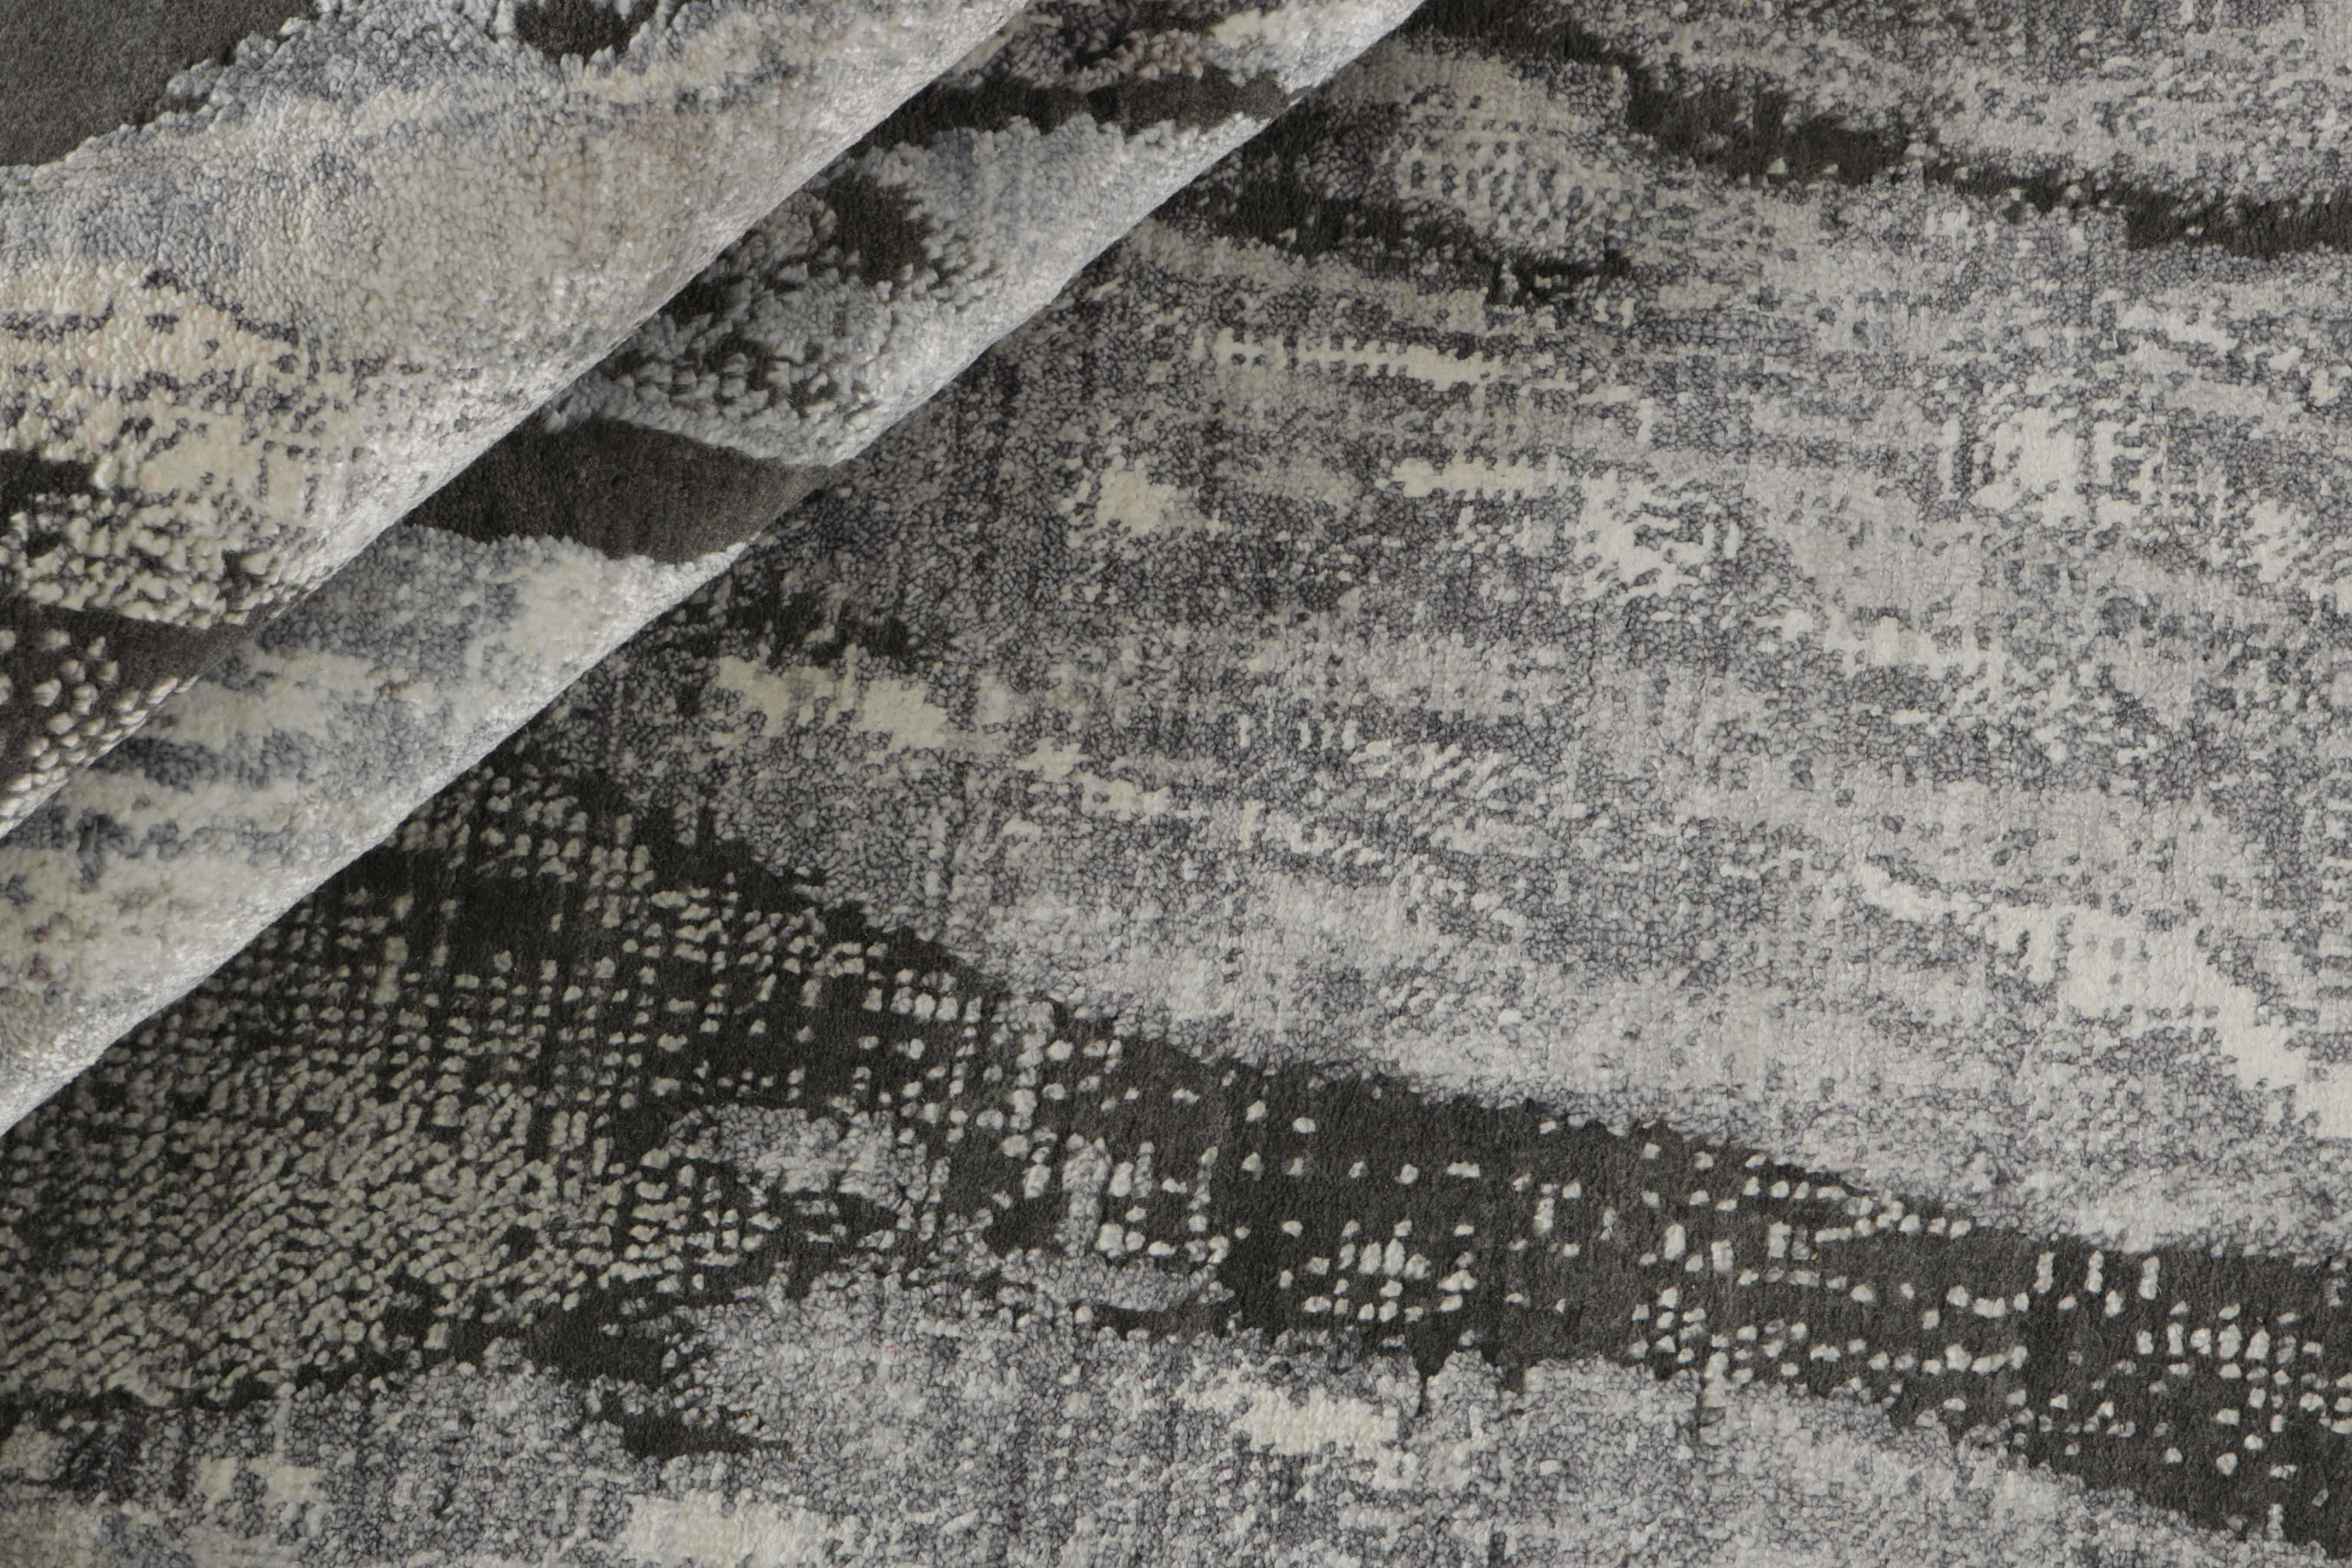 Large area rug with abstract design in grey and charcoal